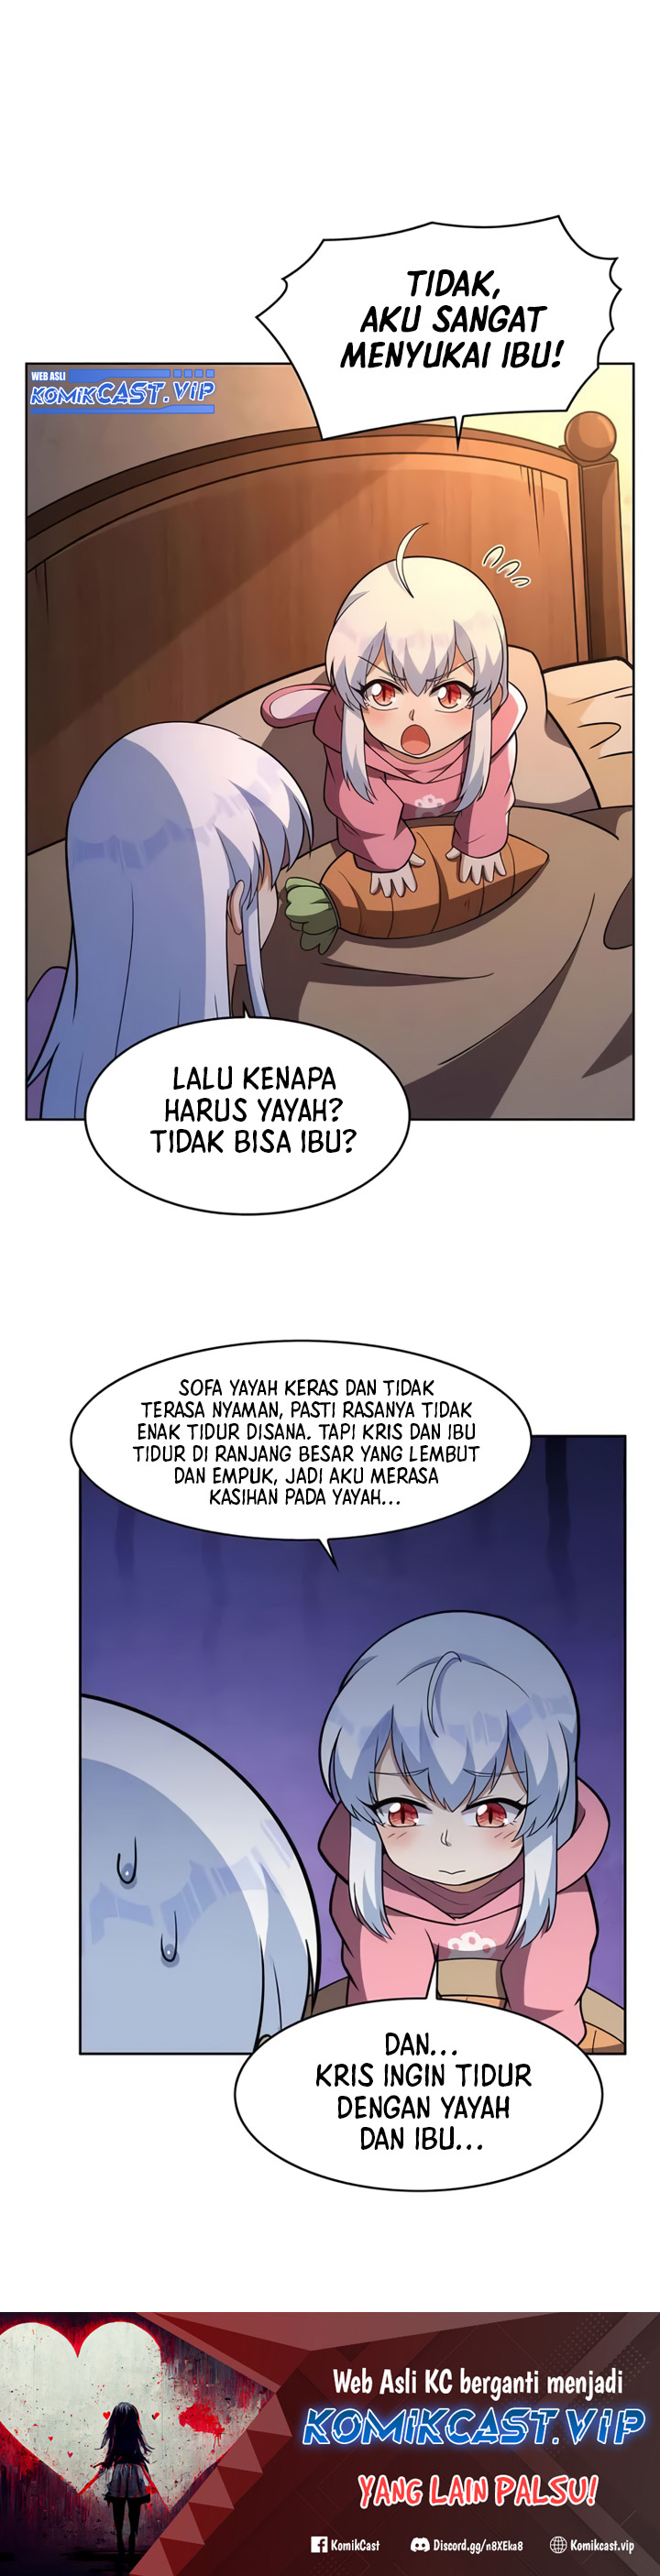 The Demon King Who Lost His Job Chapter 355 Bahasa Indonesia